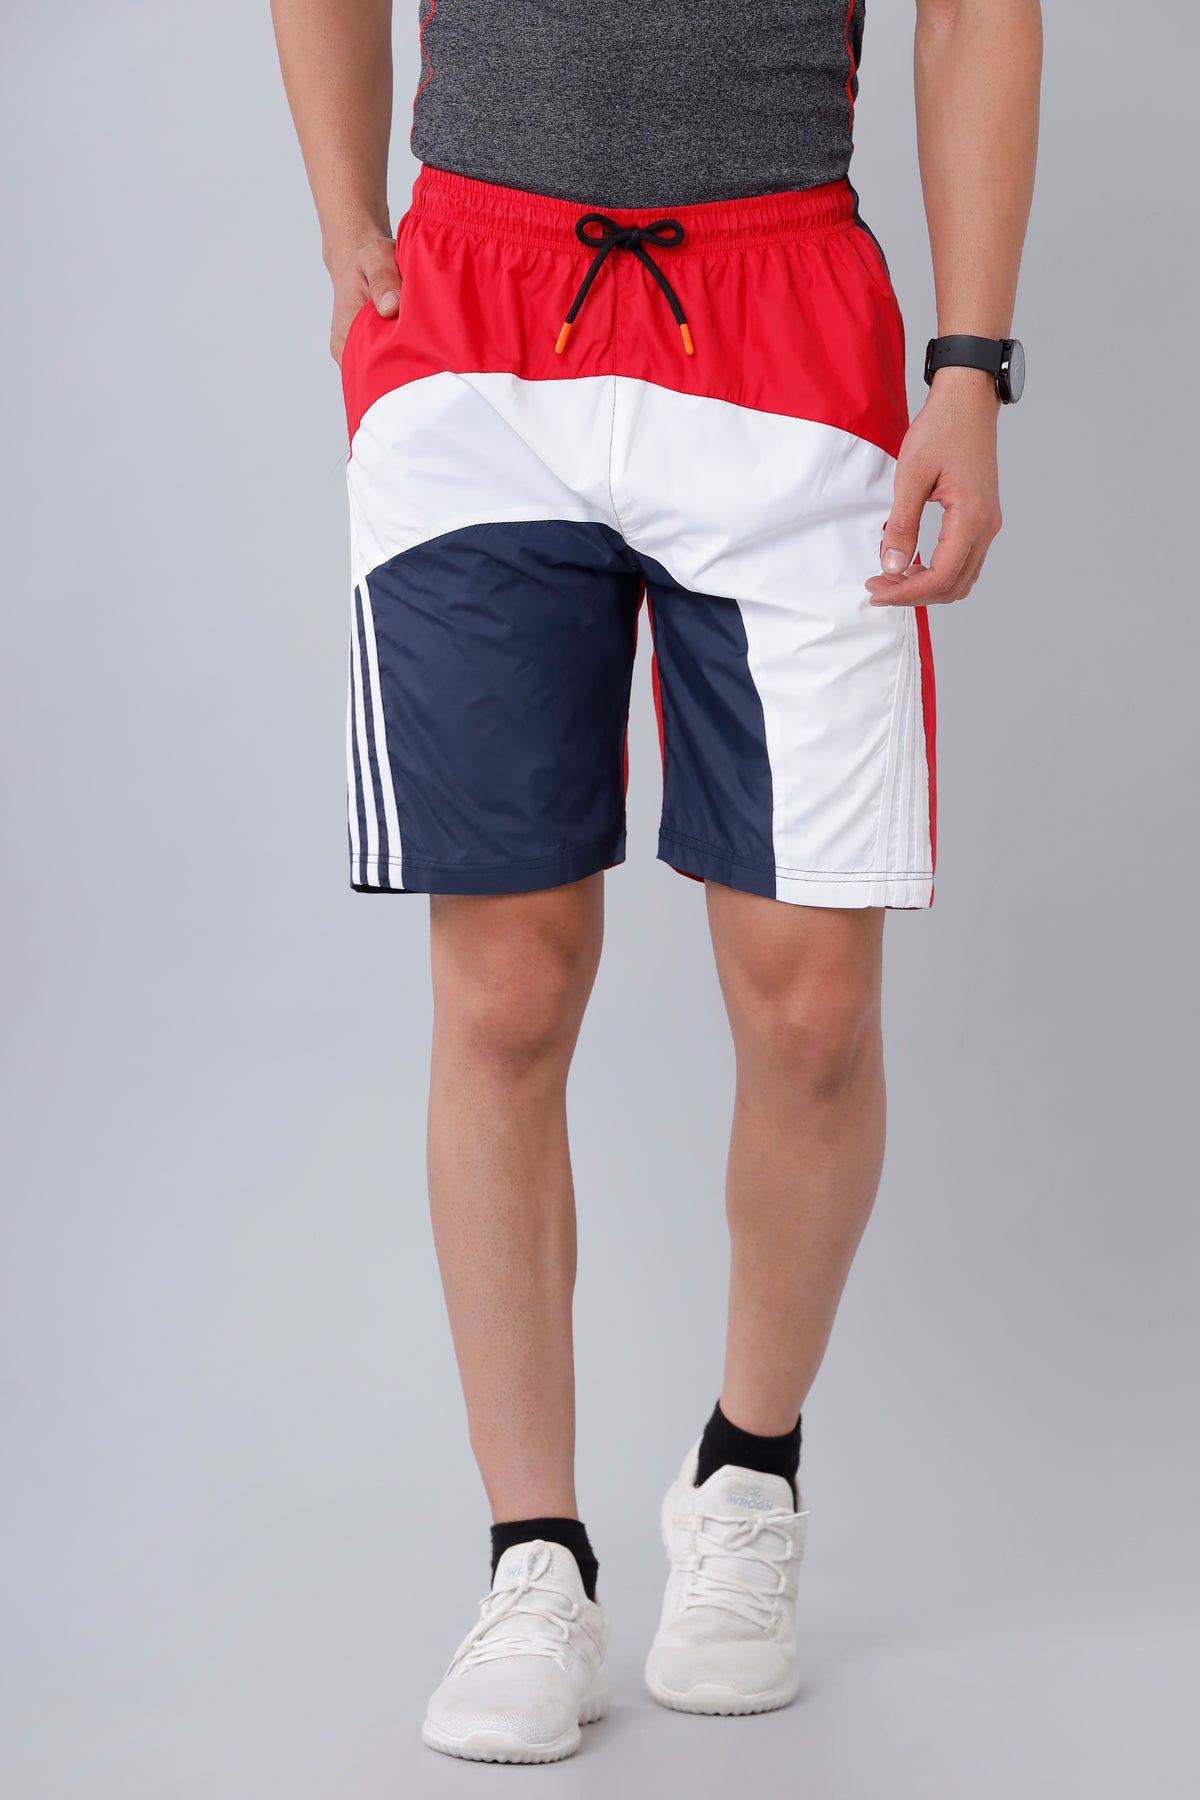 Unisexual Tri-color Dry Fit Shorts